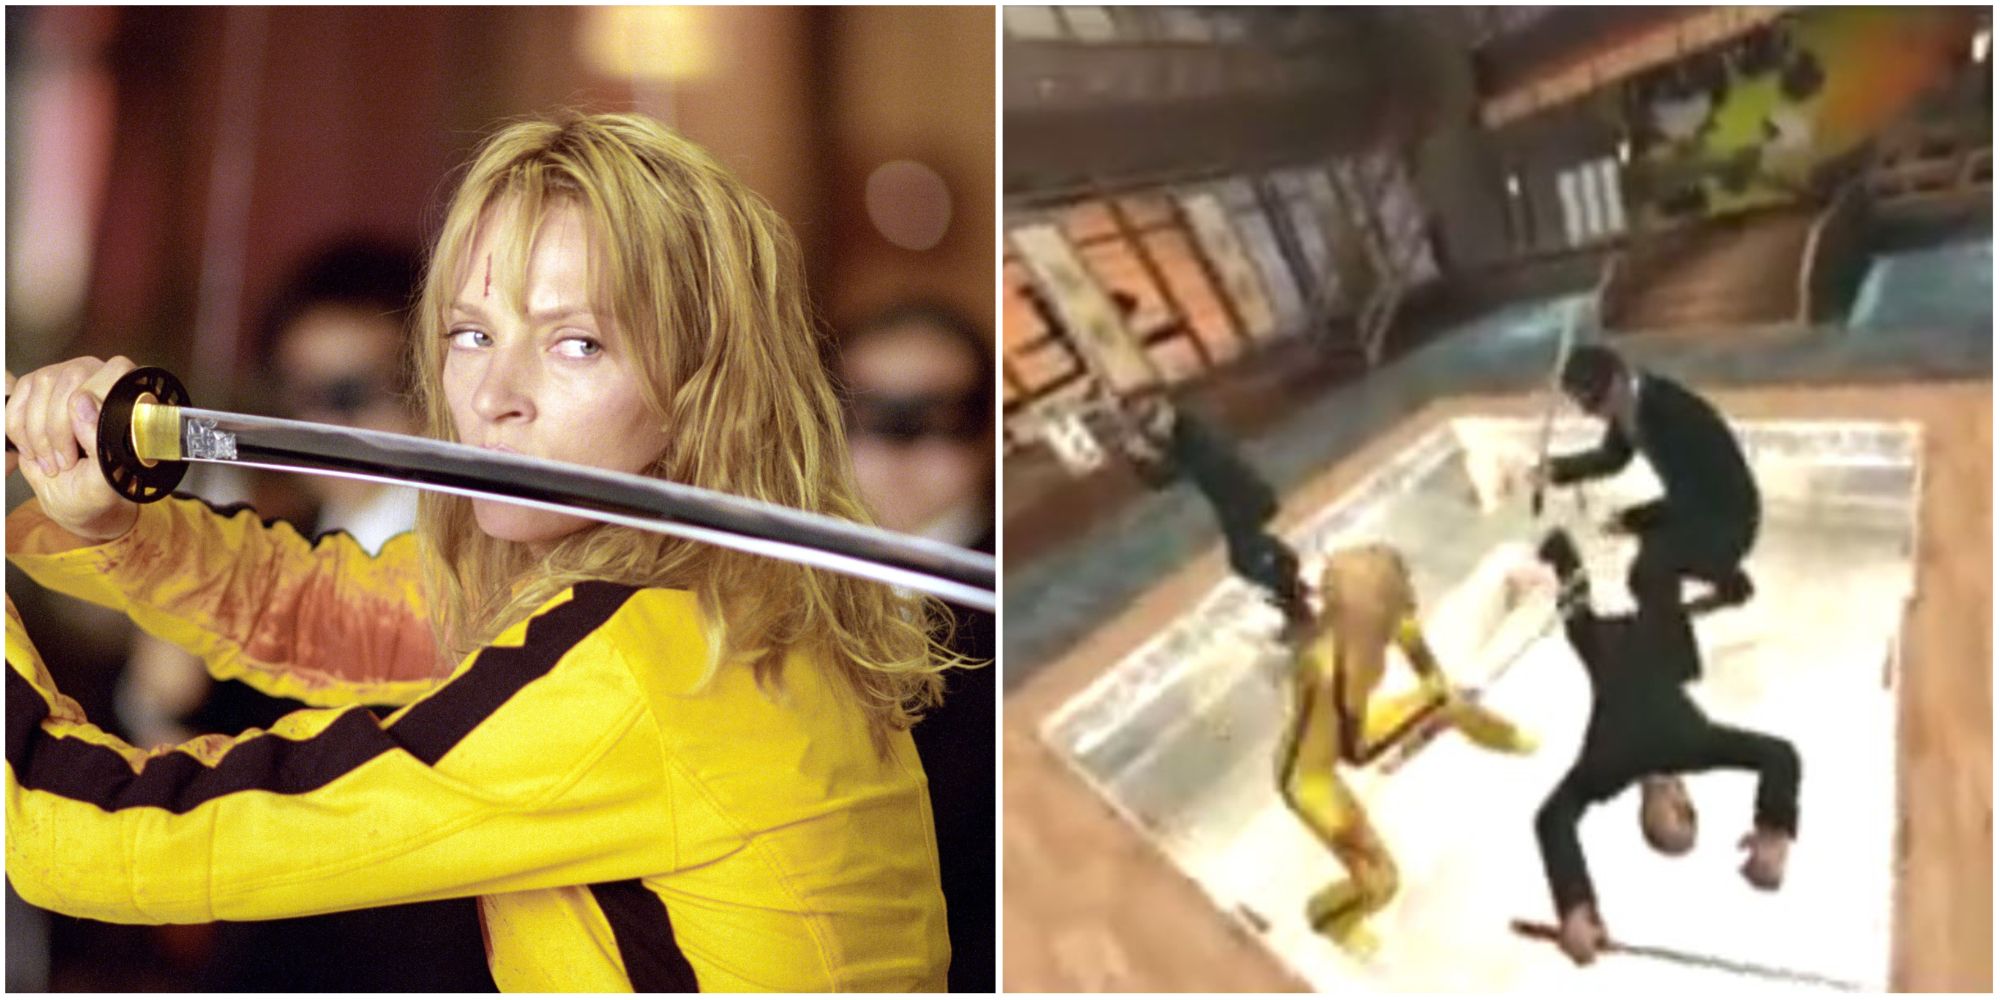 The Kill Bill Movie and Game